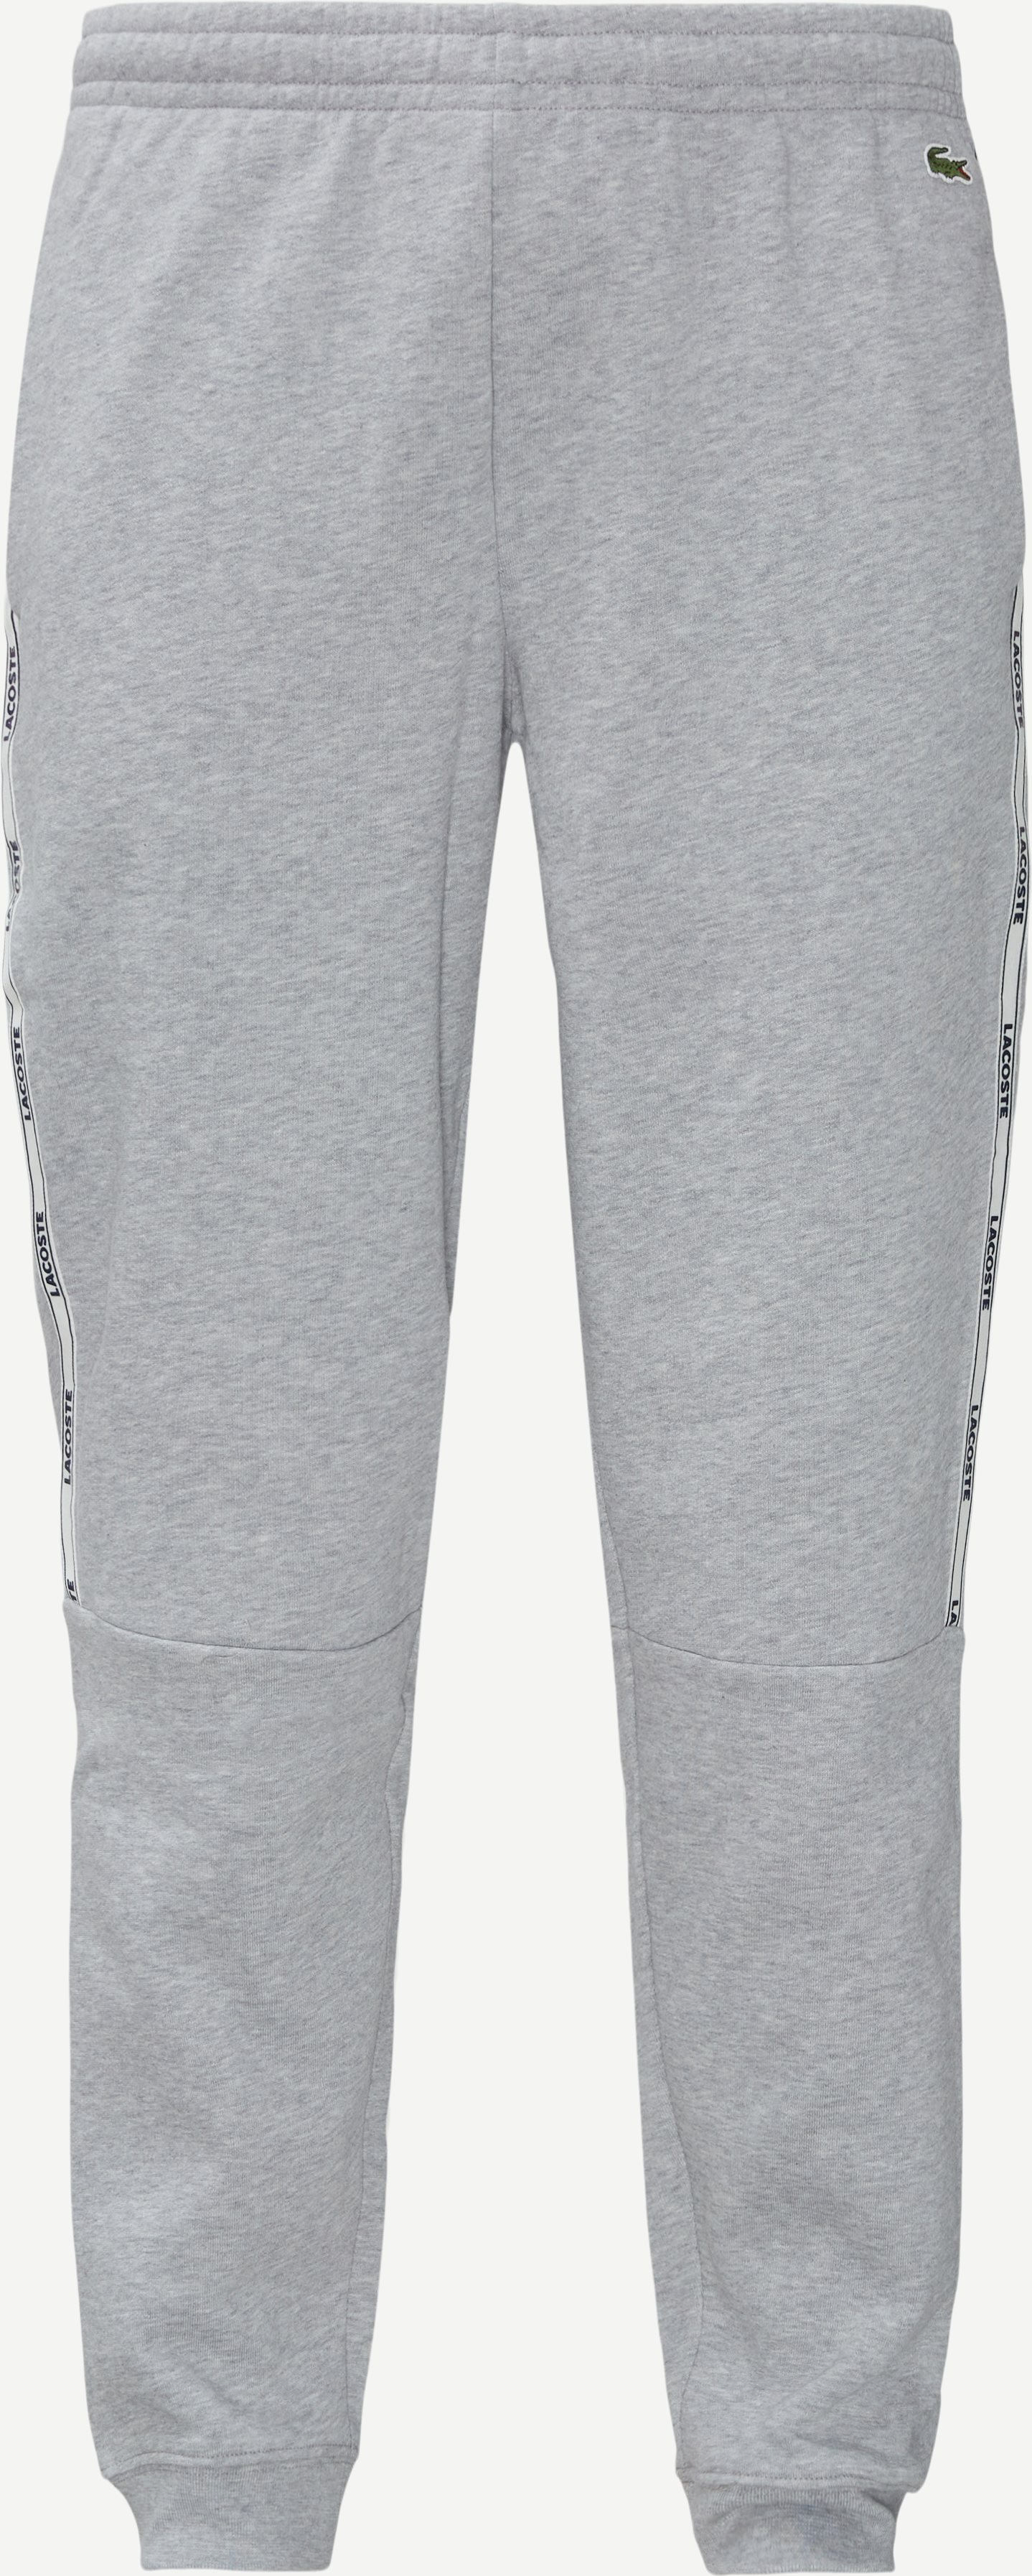 Trousers - Classic fit - Grey